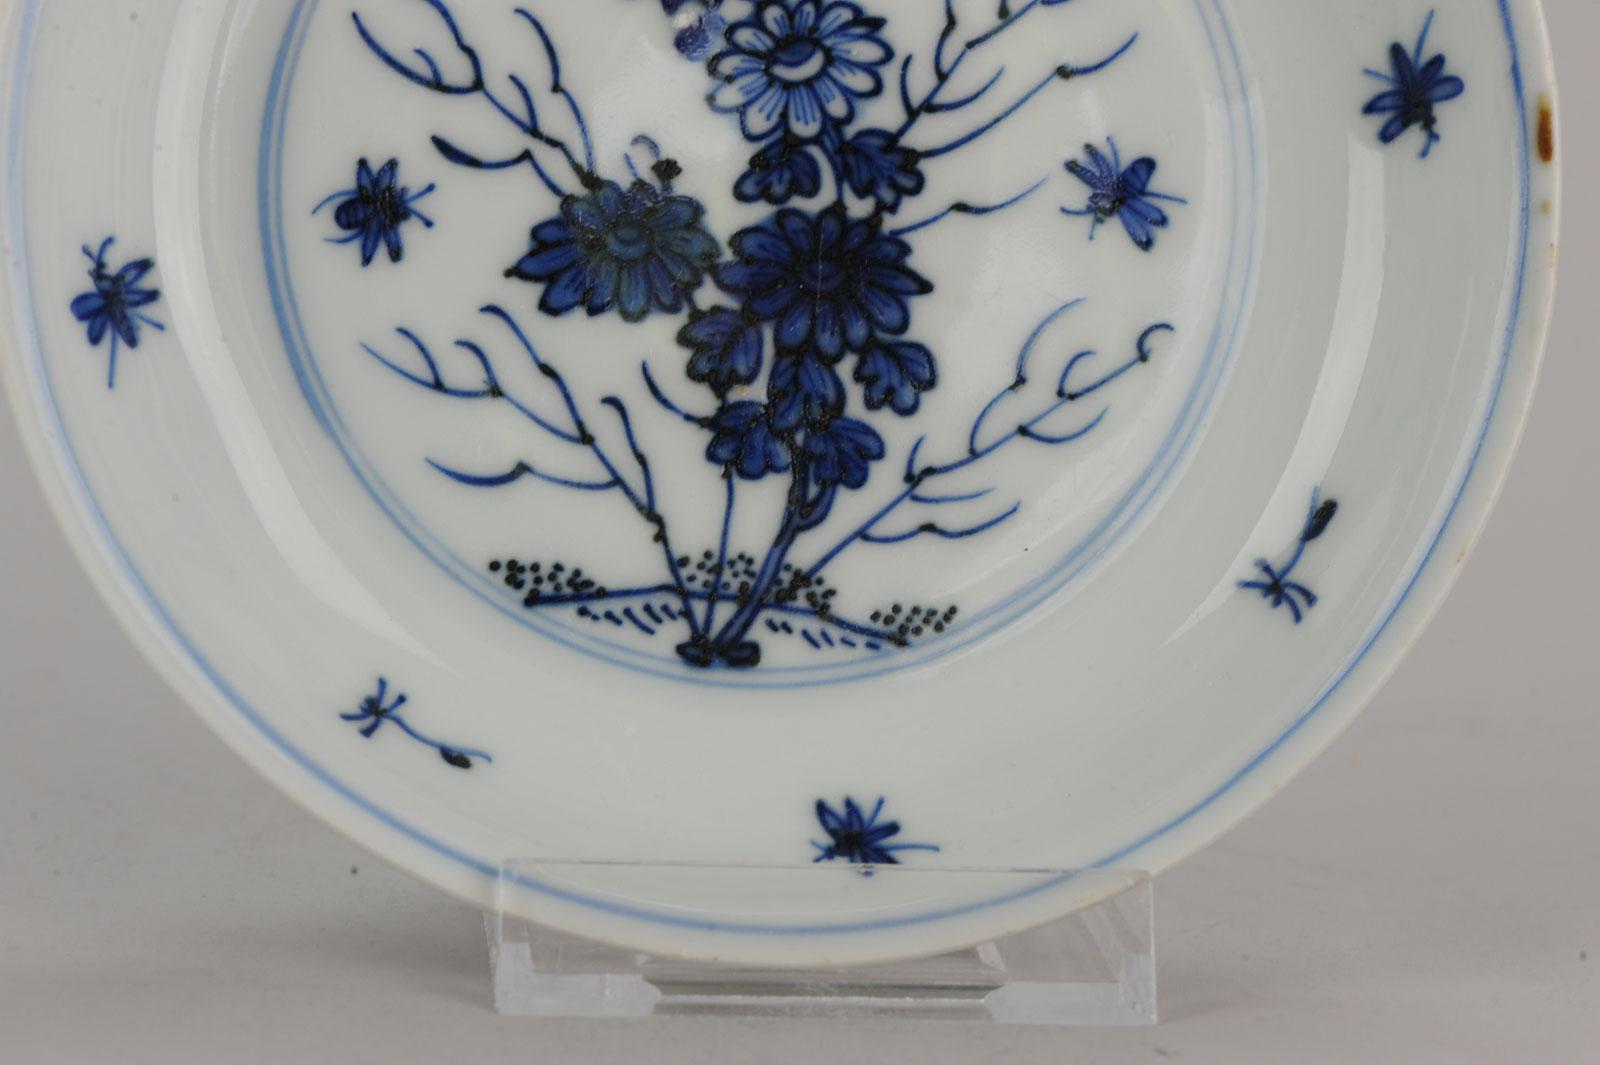 Antique Chinese Porcelain Plate 17th Century Ming Dynasty Tianqi/Chongzhen 7